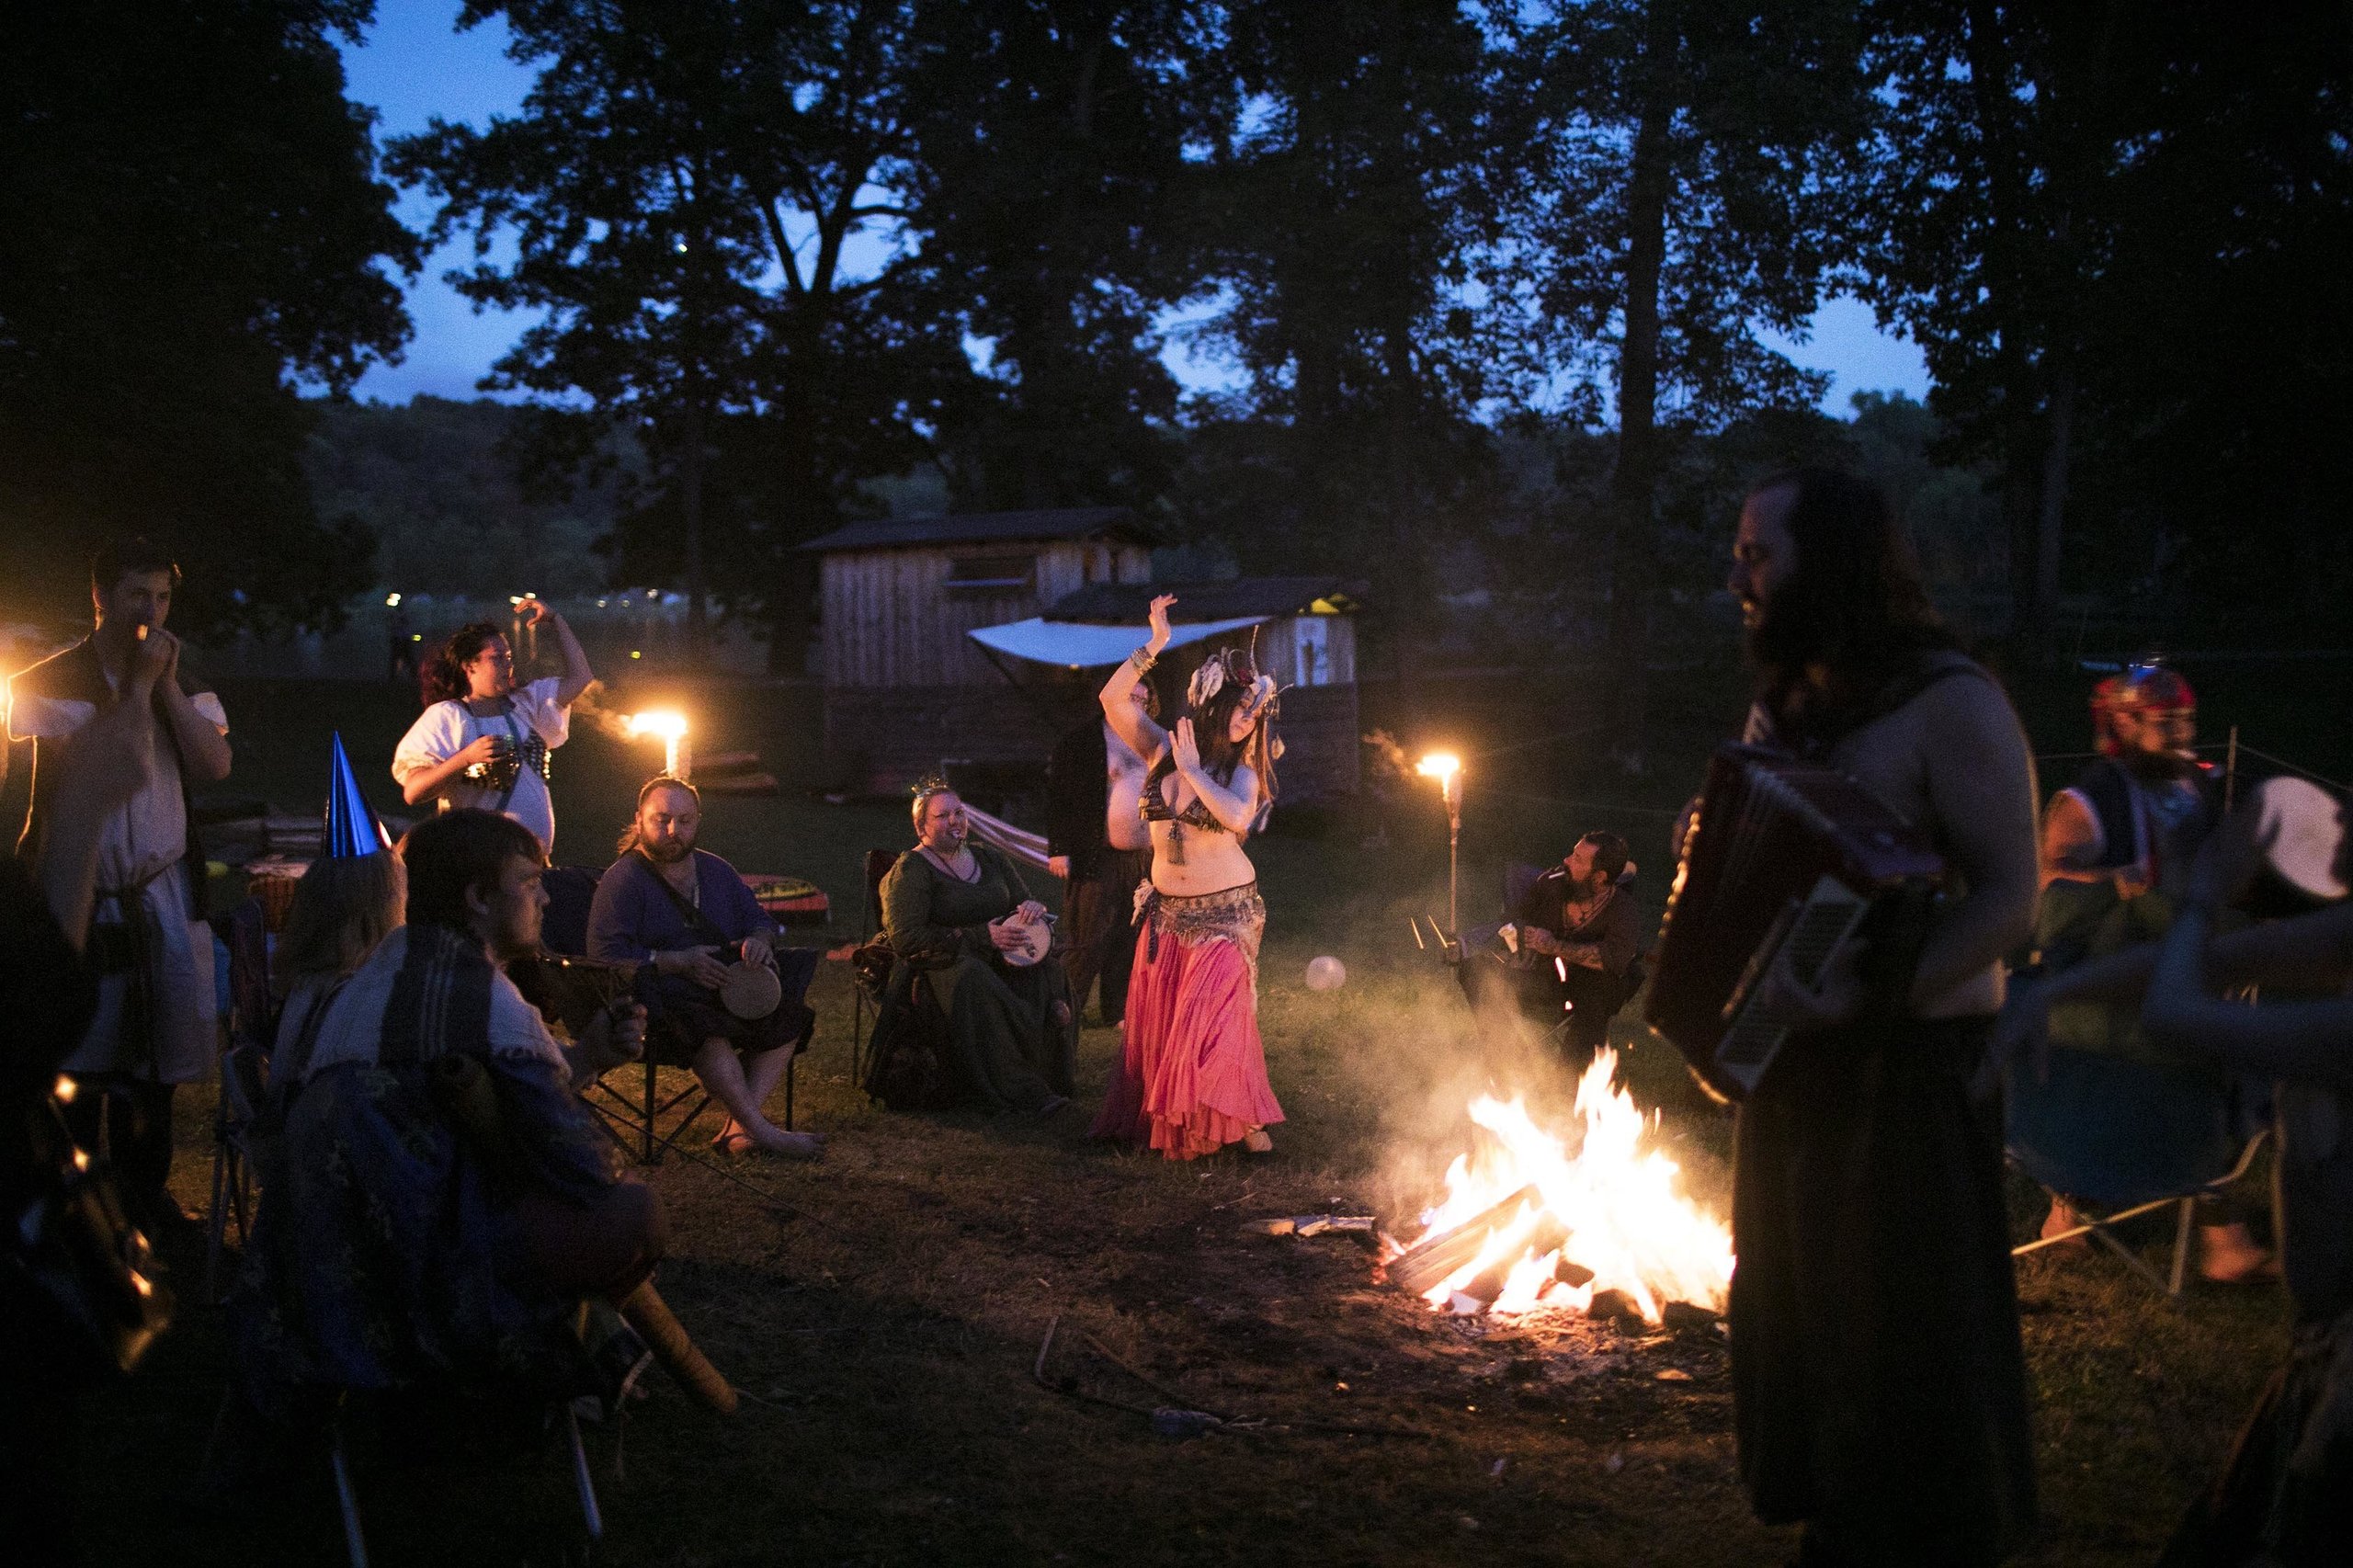 Rag attendees drink, dance and make merriment around the fire at an after-hours campout.